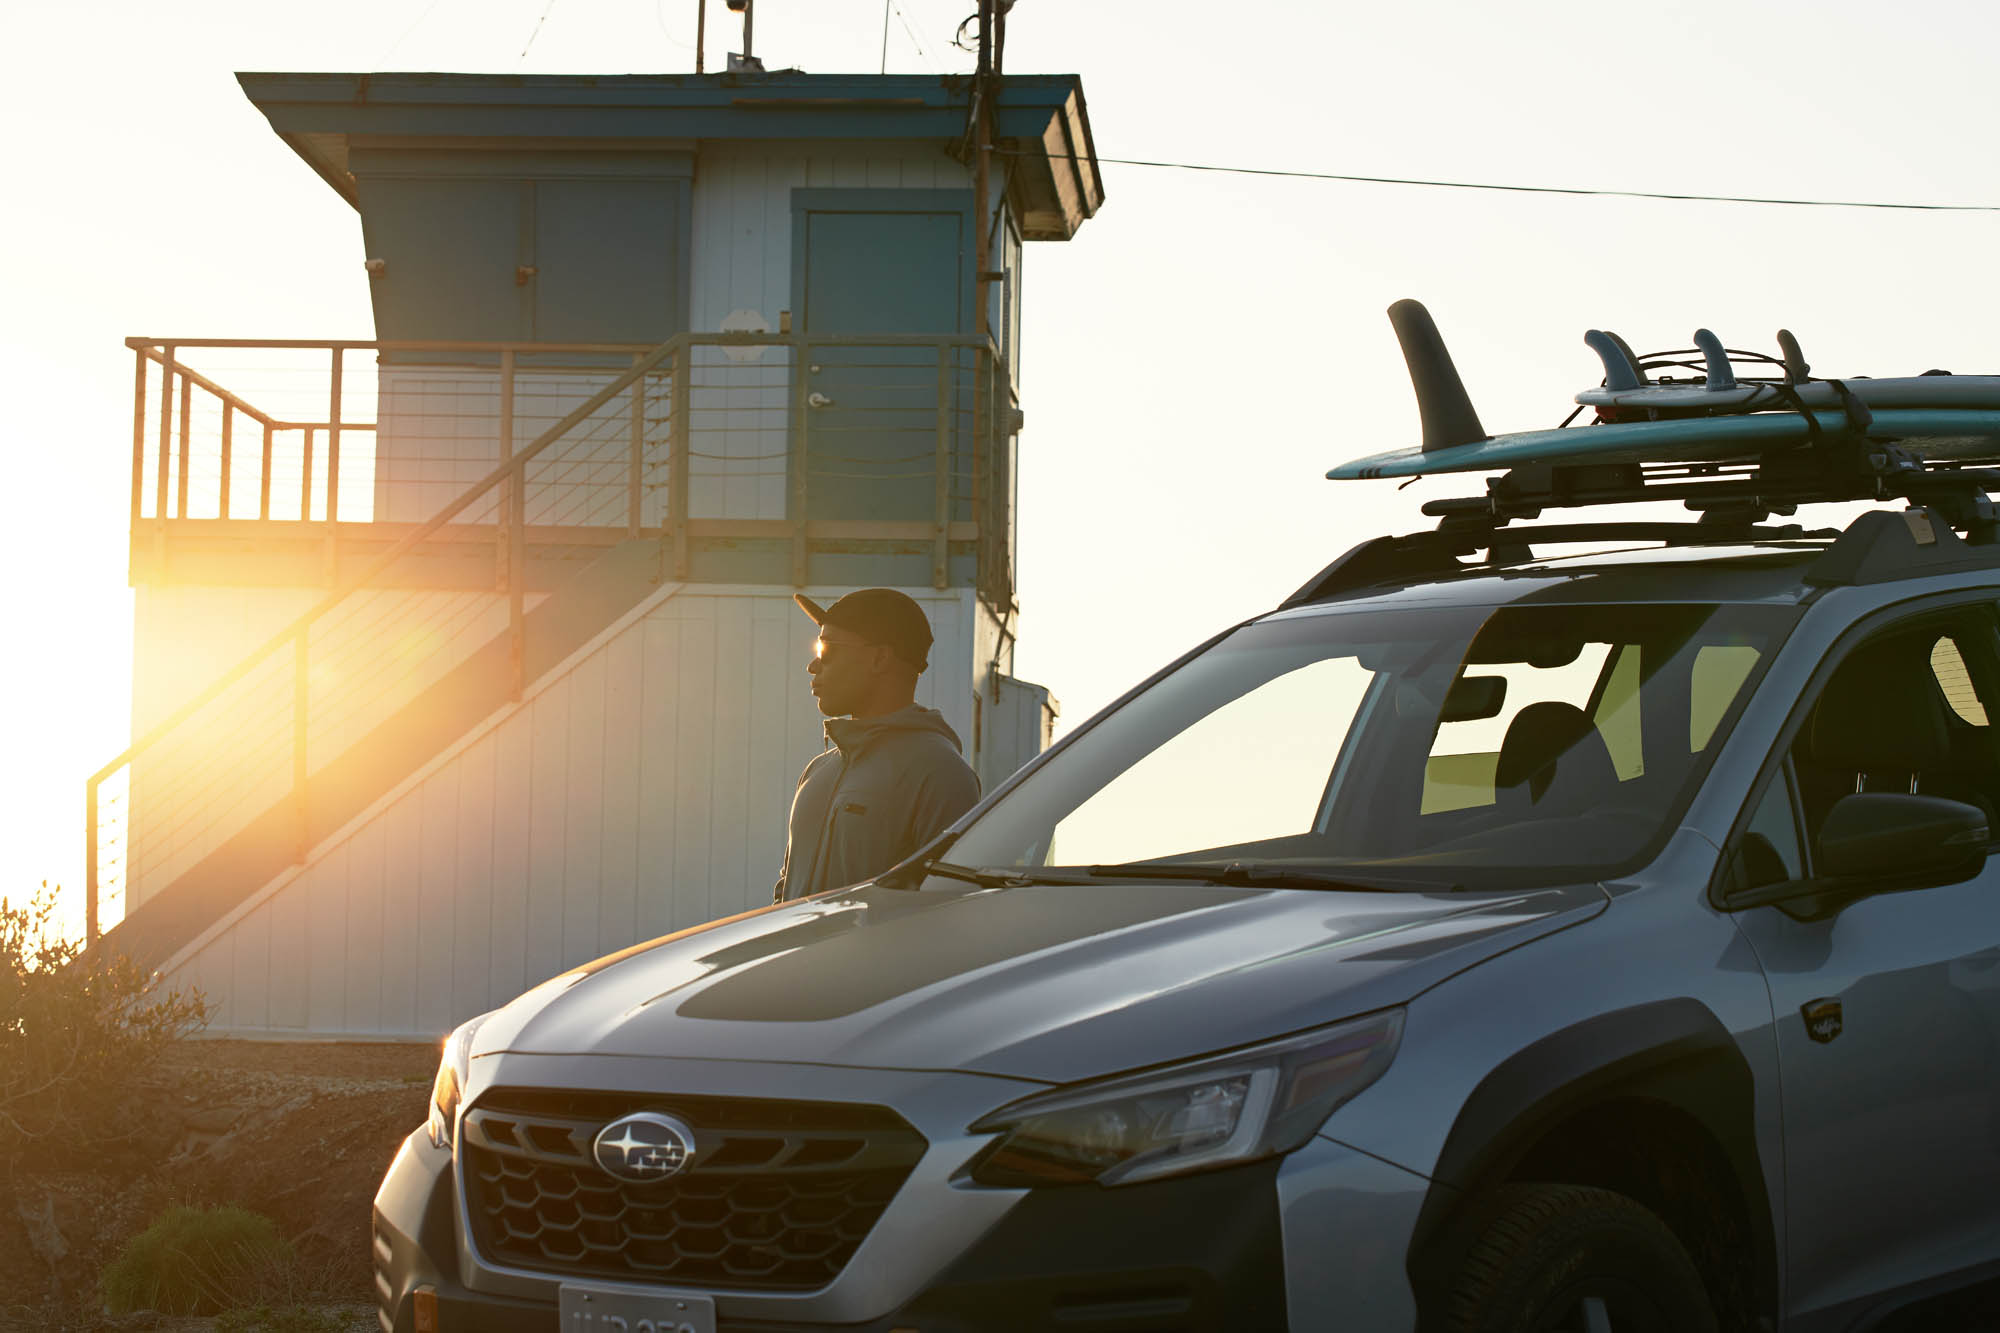 Subaru Outback with Andrew Alexander King